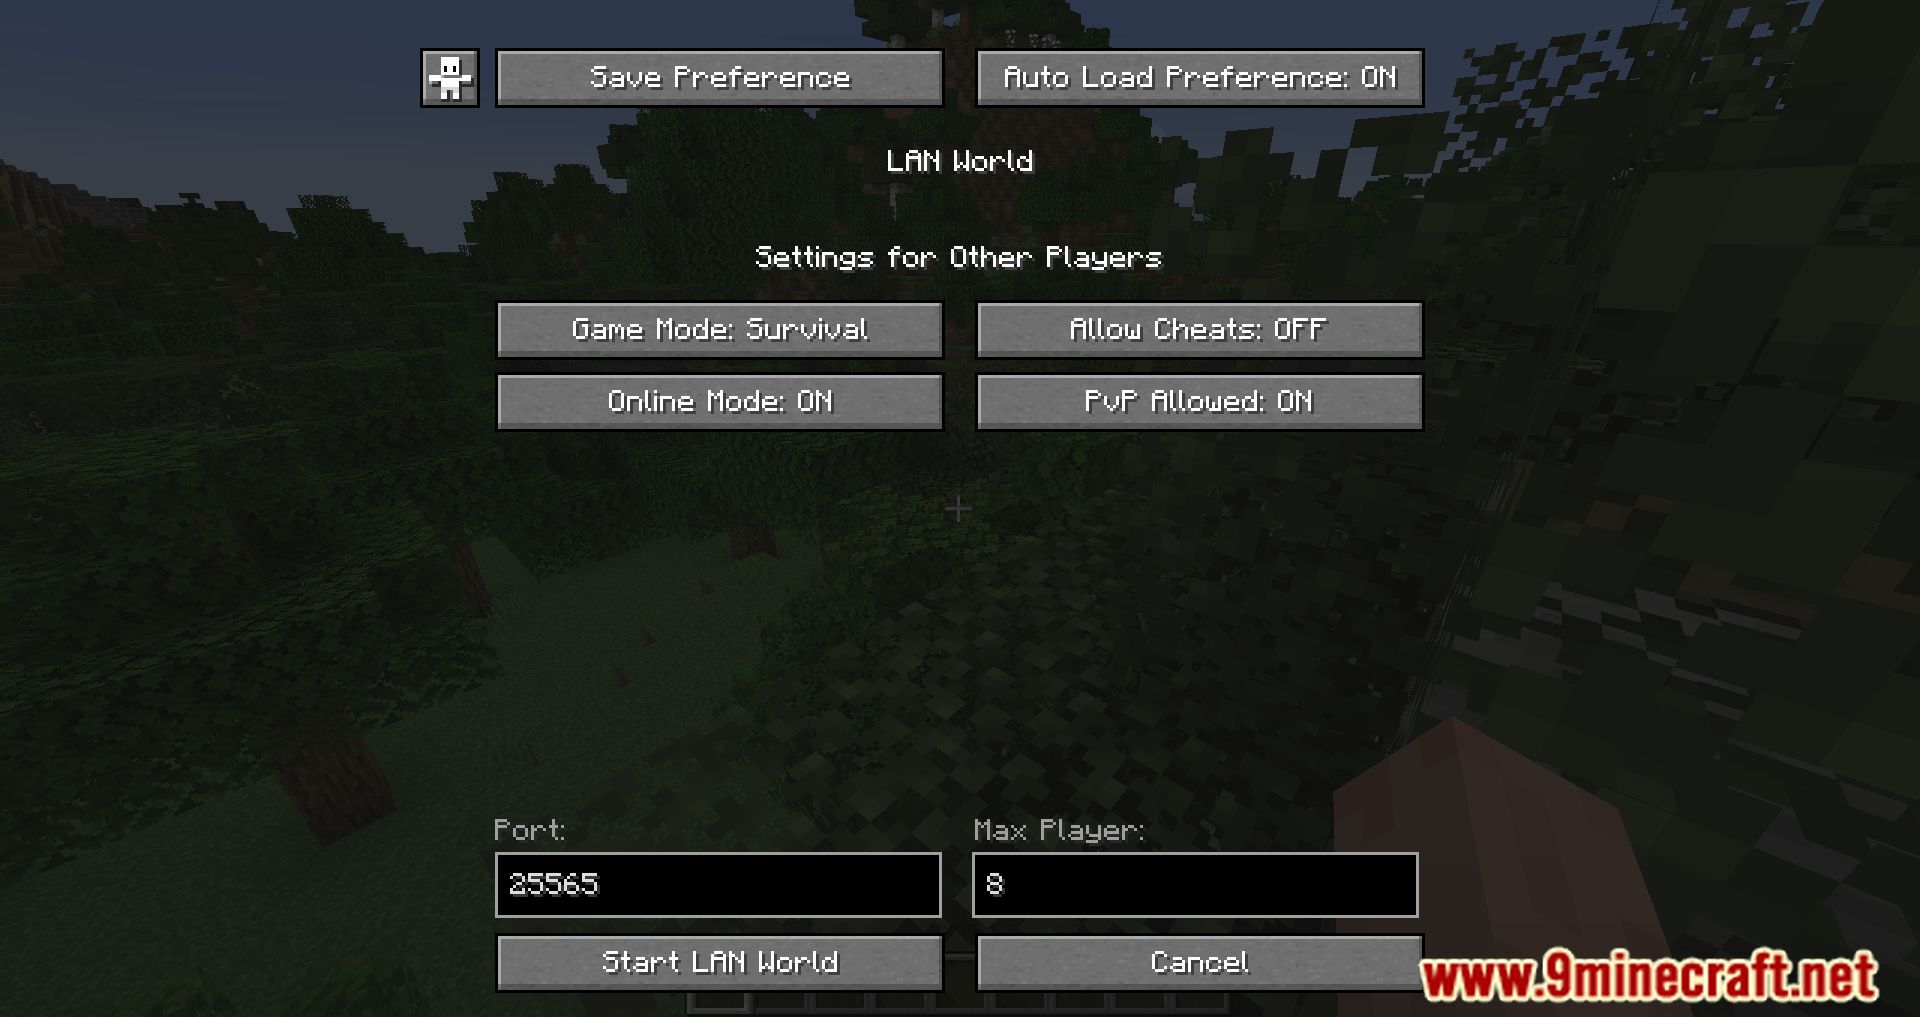 Lan Server Properties Mod (1.20.4, 1.19.4) - Allows You To Enable Or Disable PVP 6